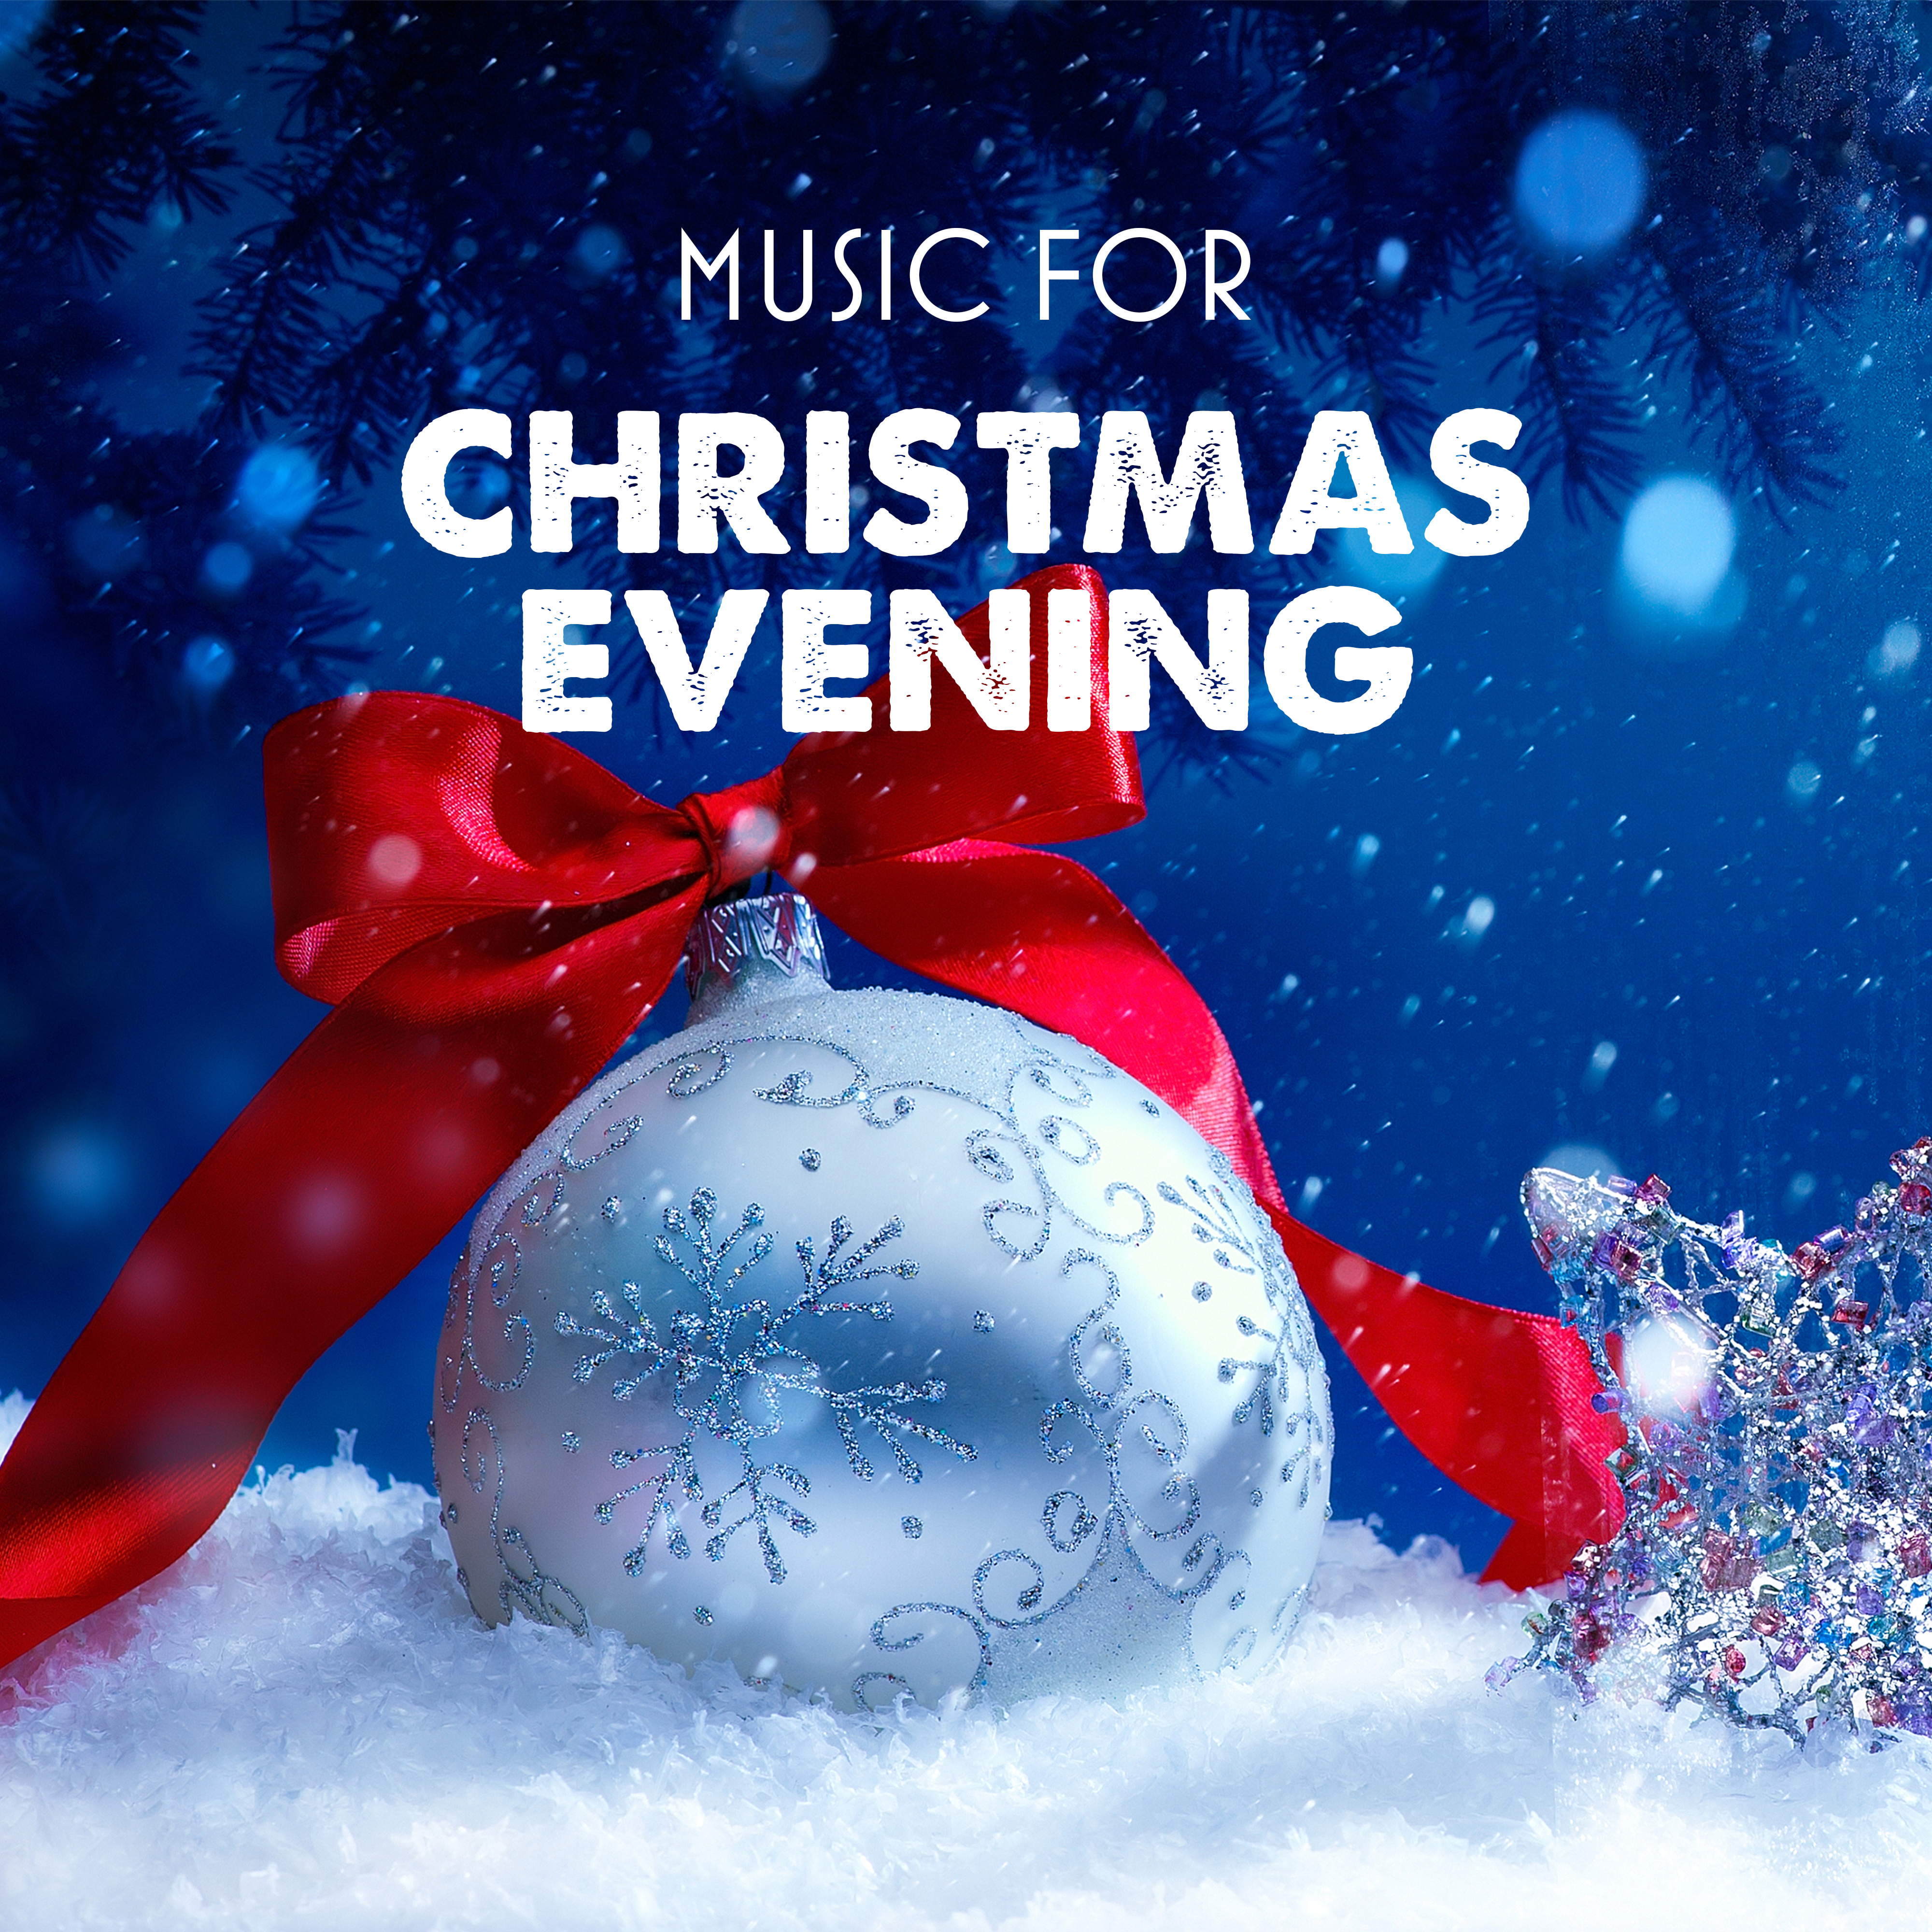 Music for Christmas Evening